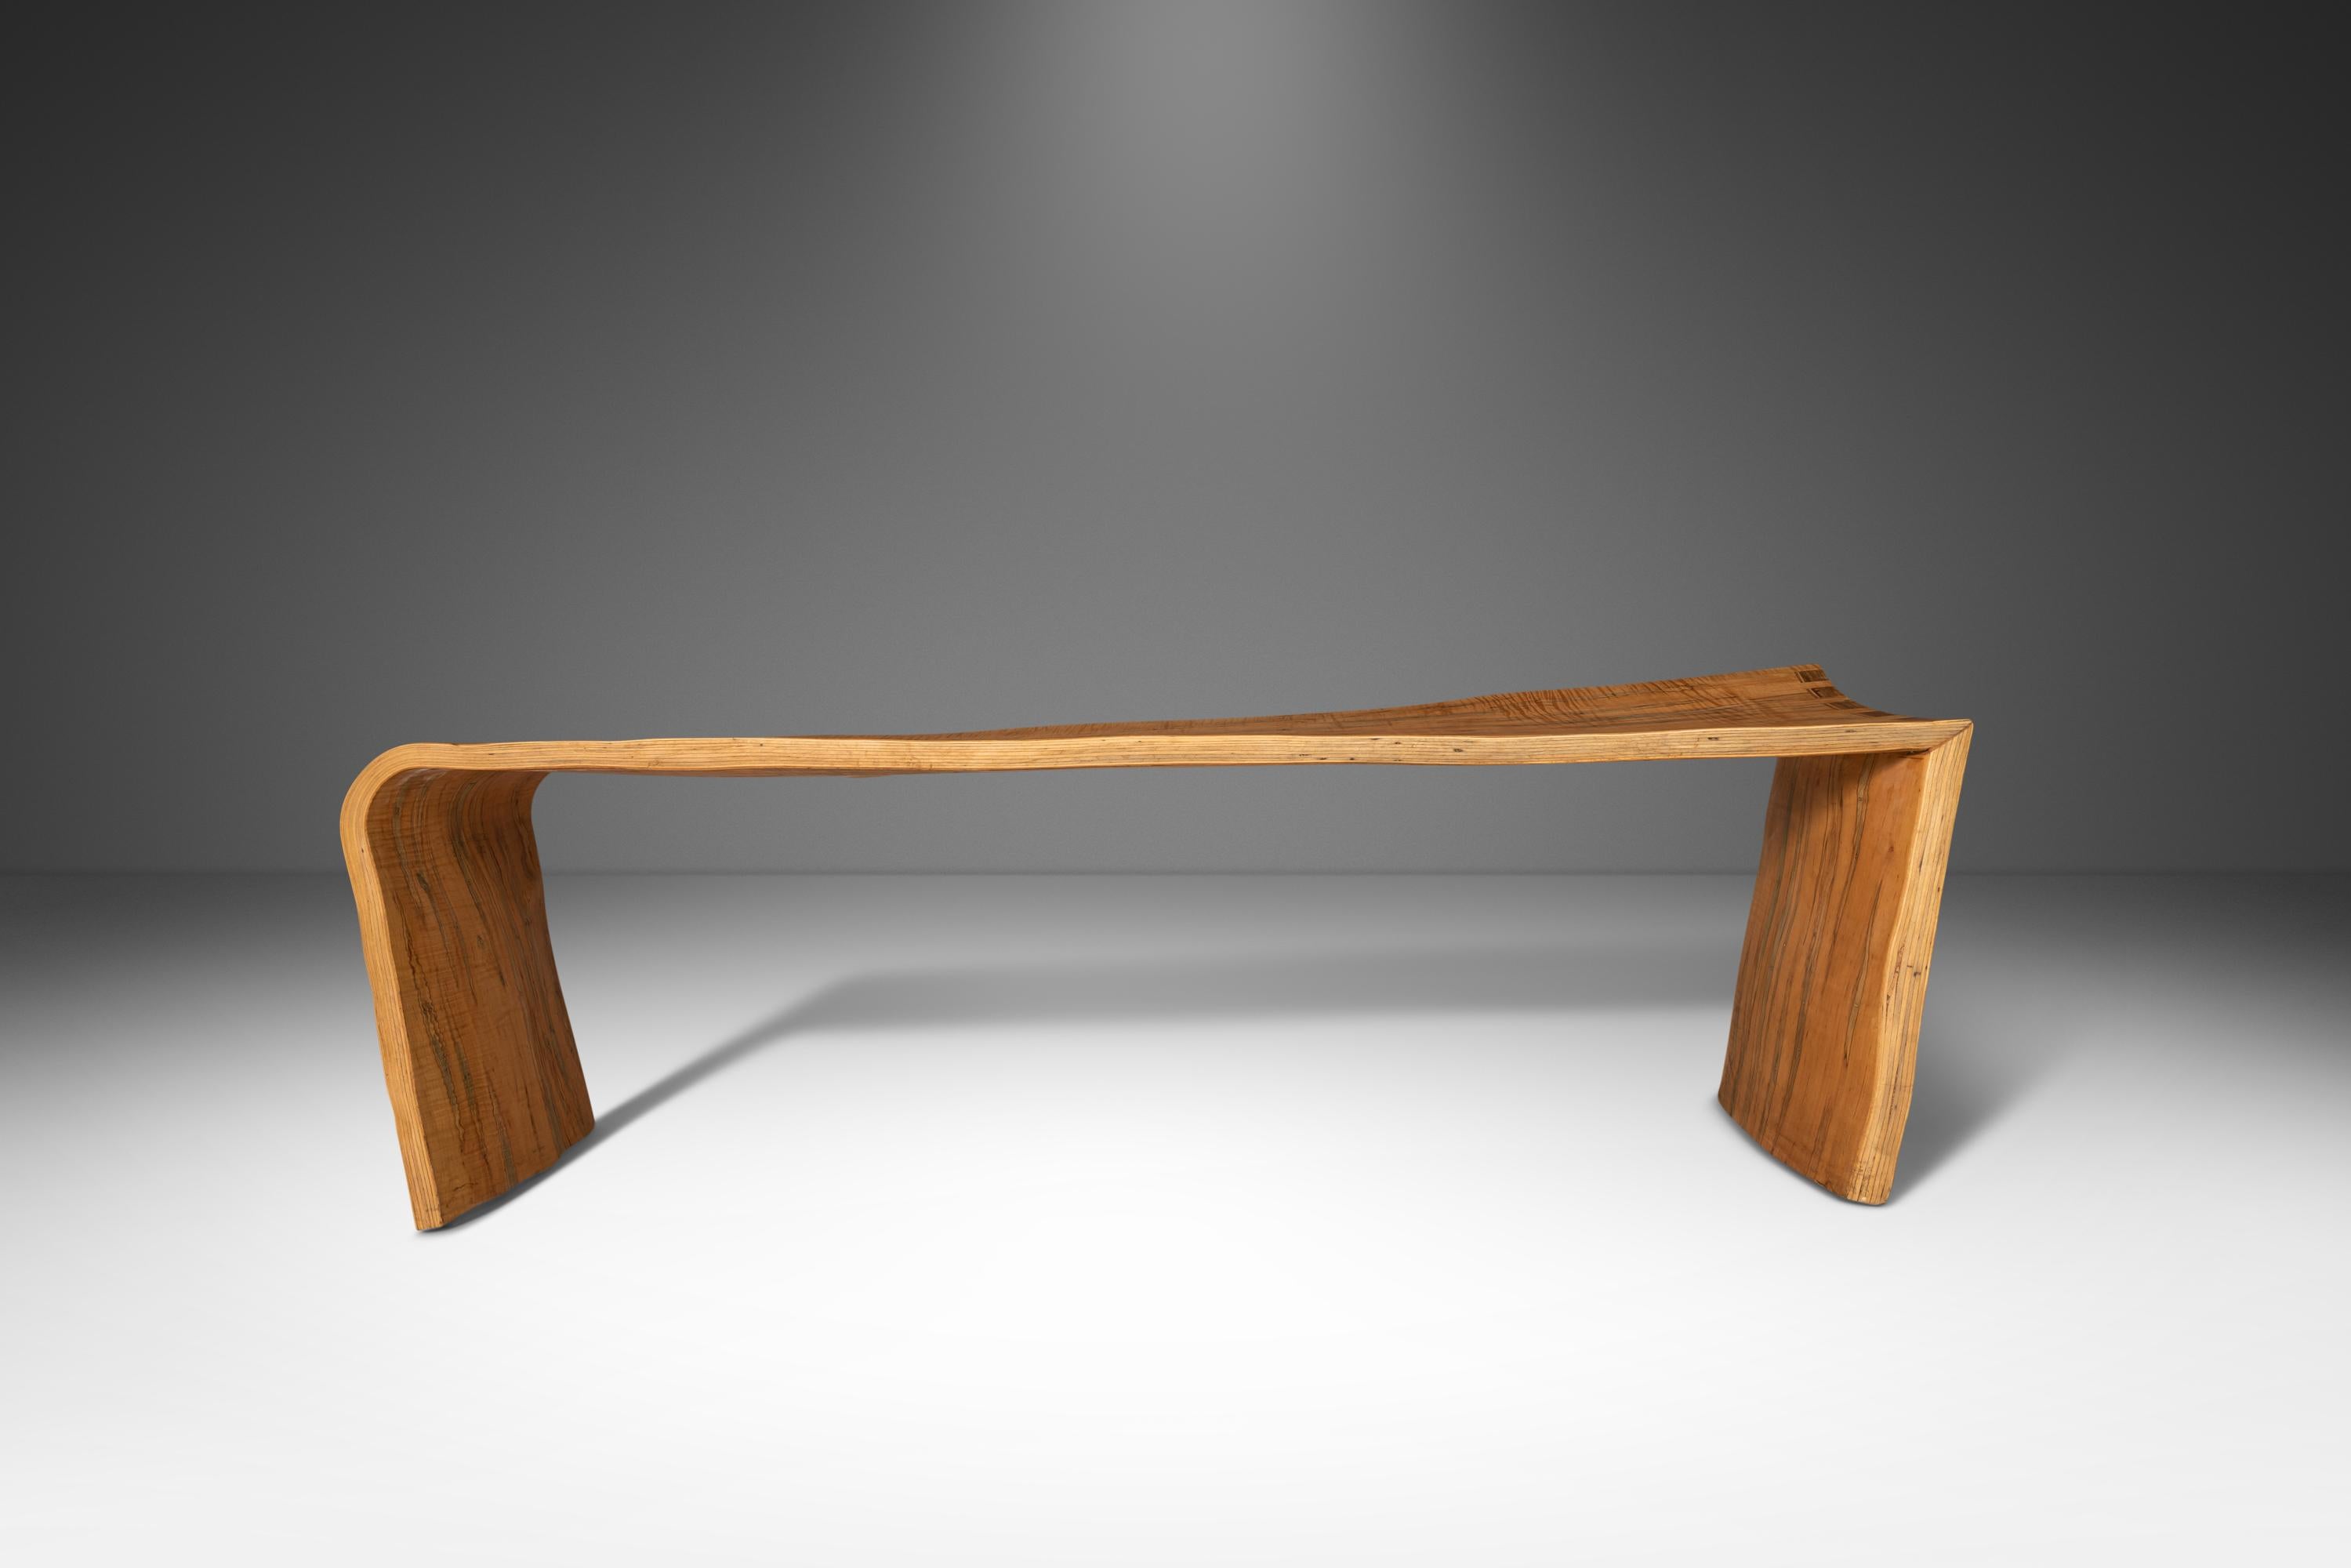 Bentwood Asymmetrical Abstract Three Seater Bench in Ambrosia Maple, Usa, 1980s For Sale 7